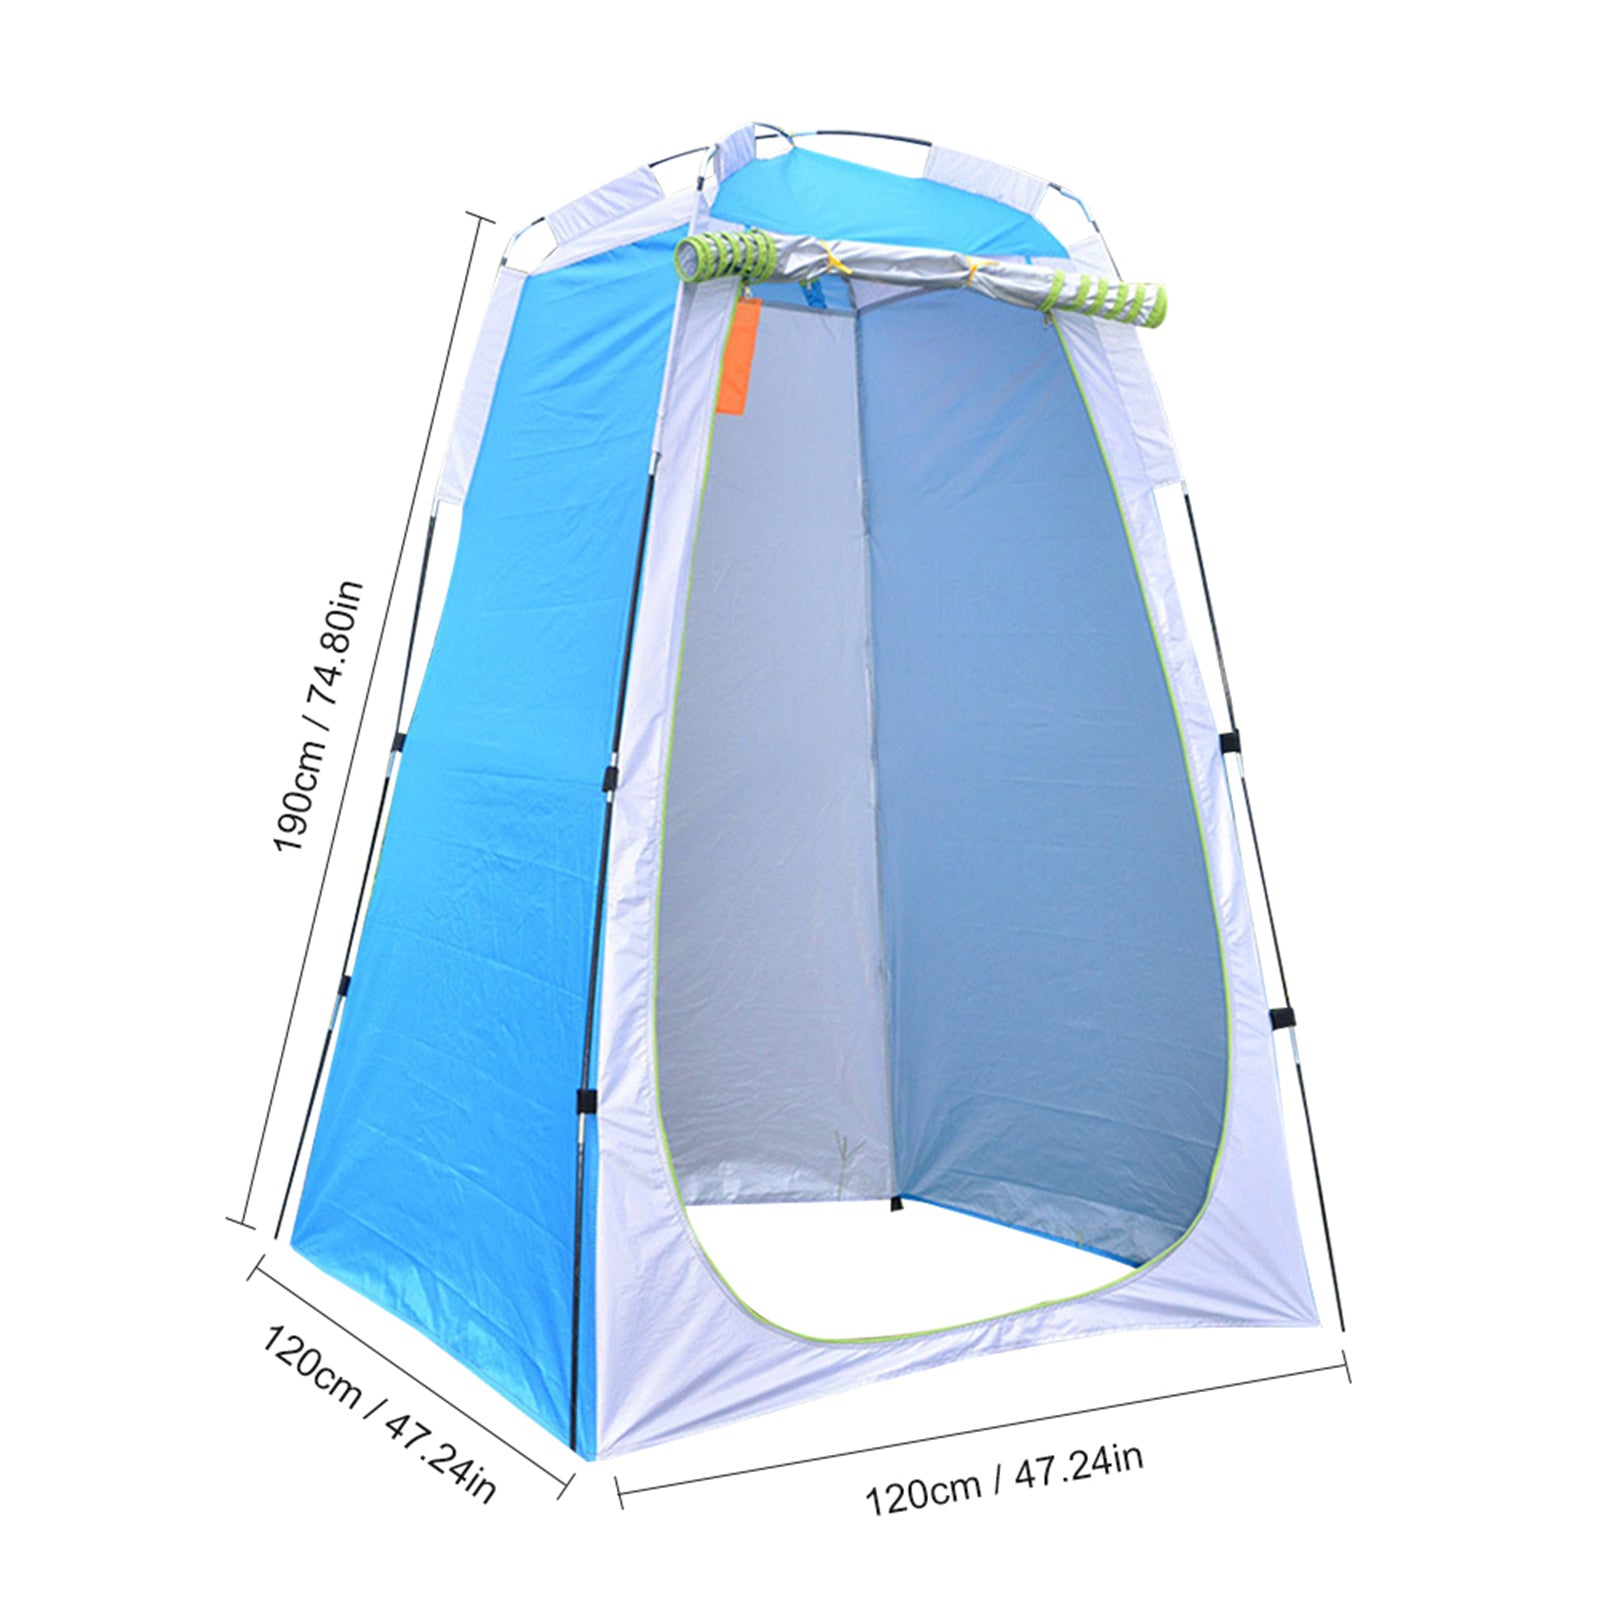 Portable Outdoor Toilet Privacy Shower Tent - size (120*120*190 cm)